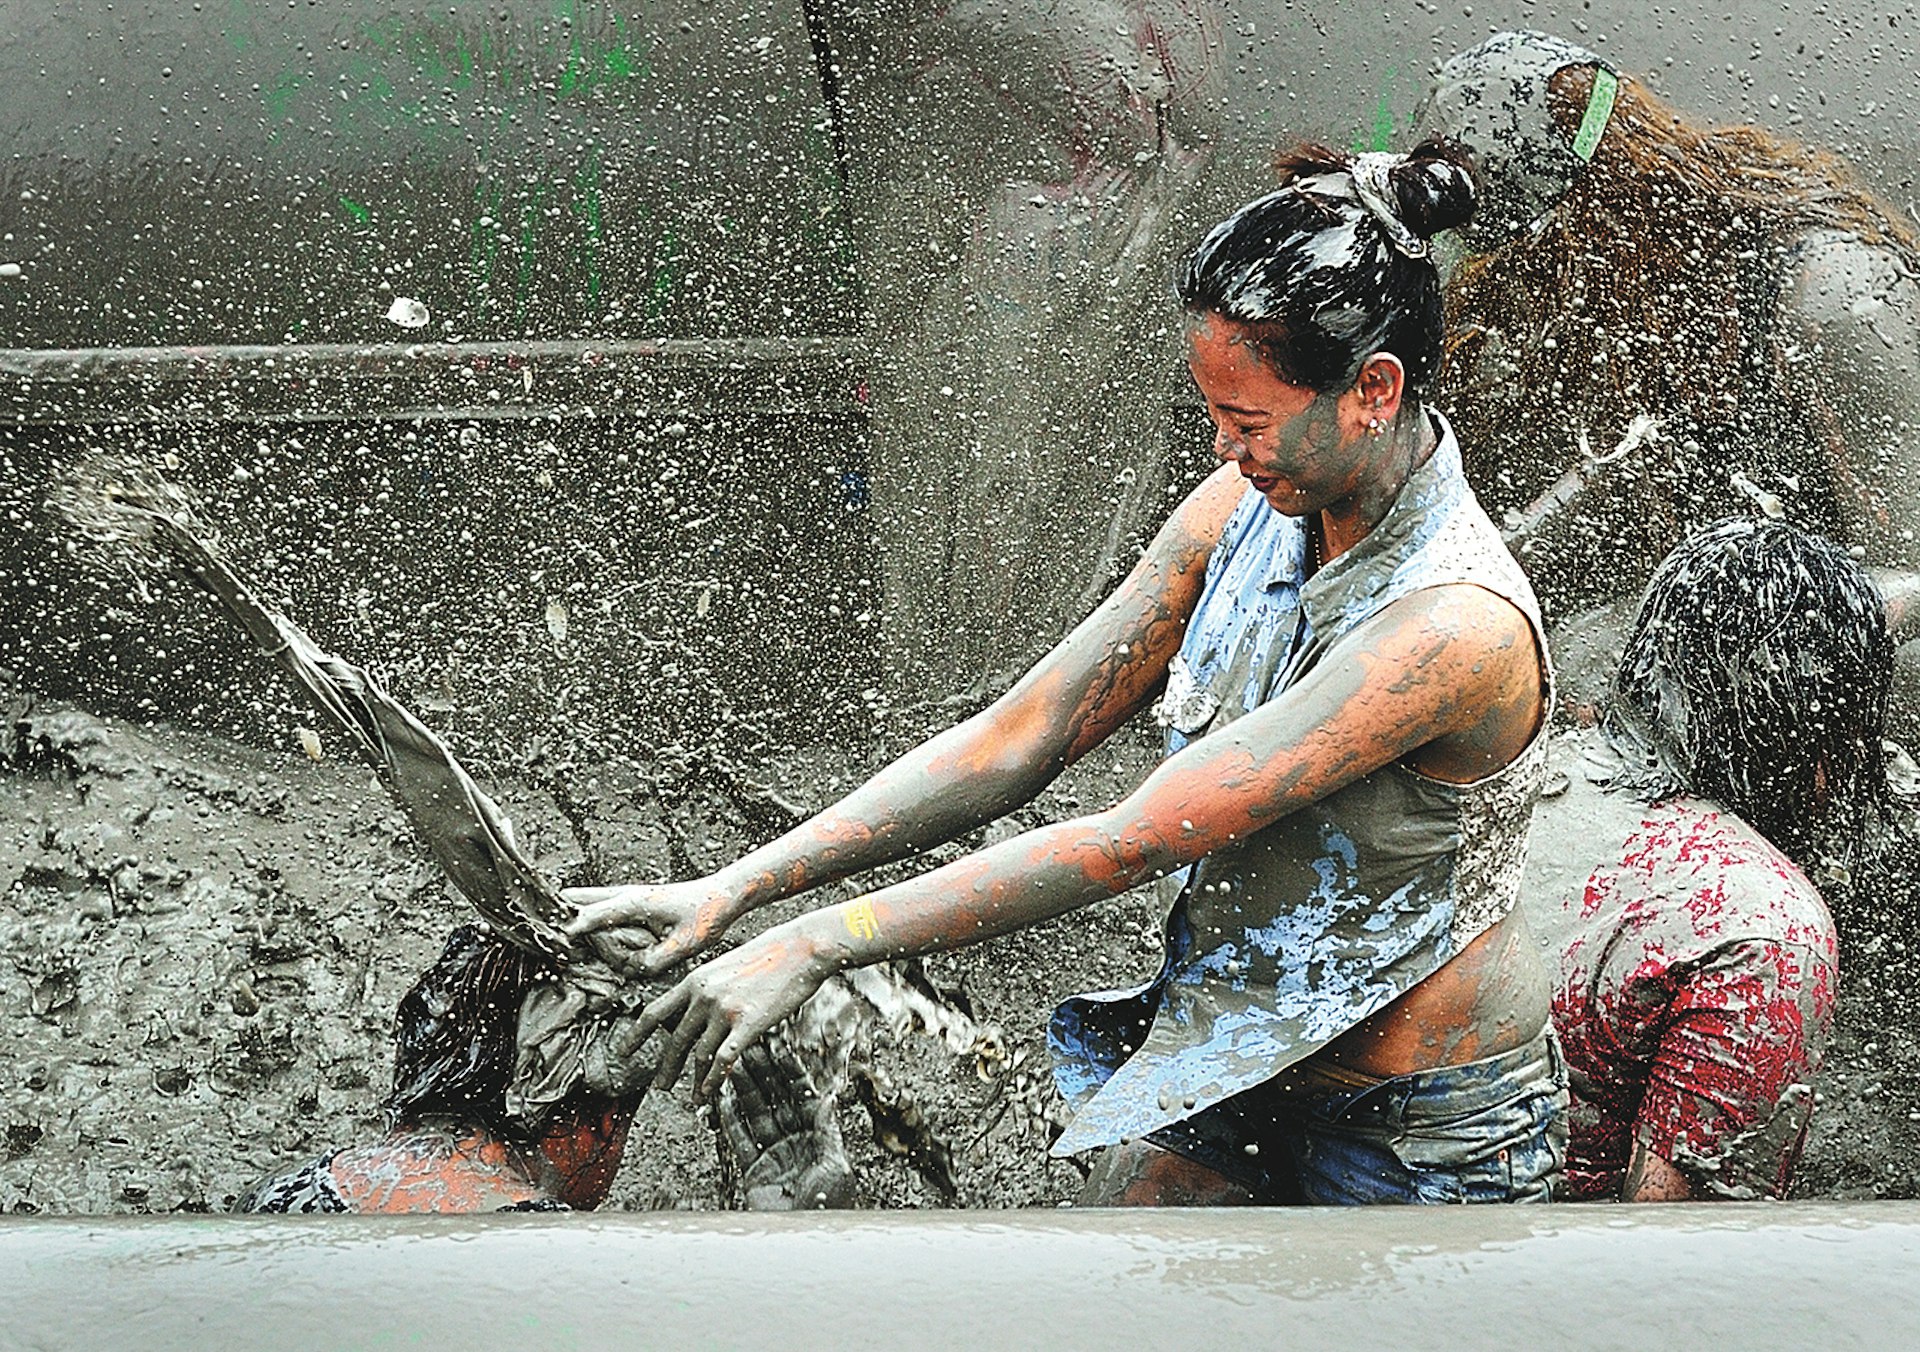 Get your hands – and everything else – dirty at the Boryeong Mud Festival © Boryeong Mud Festival